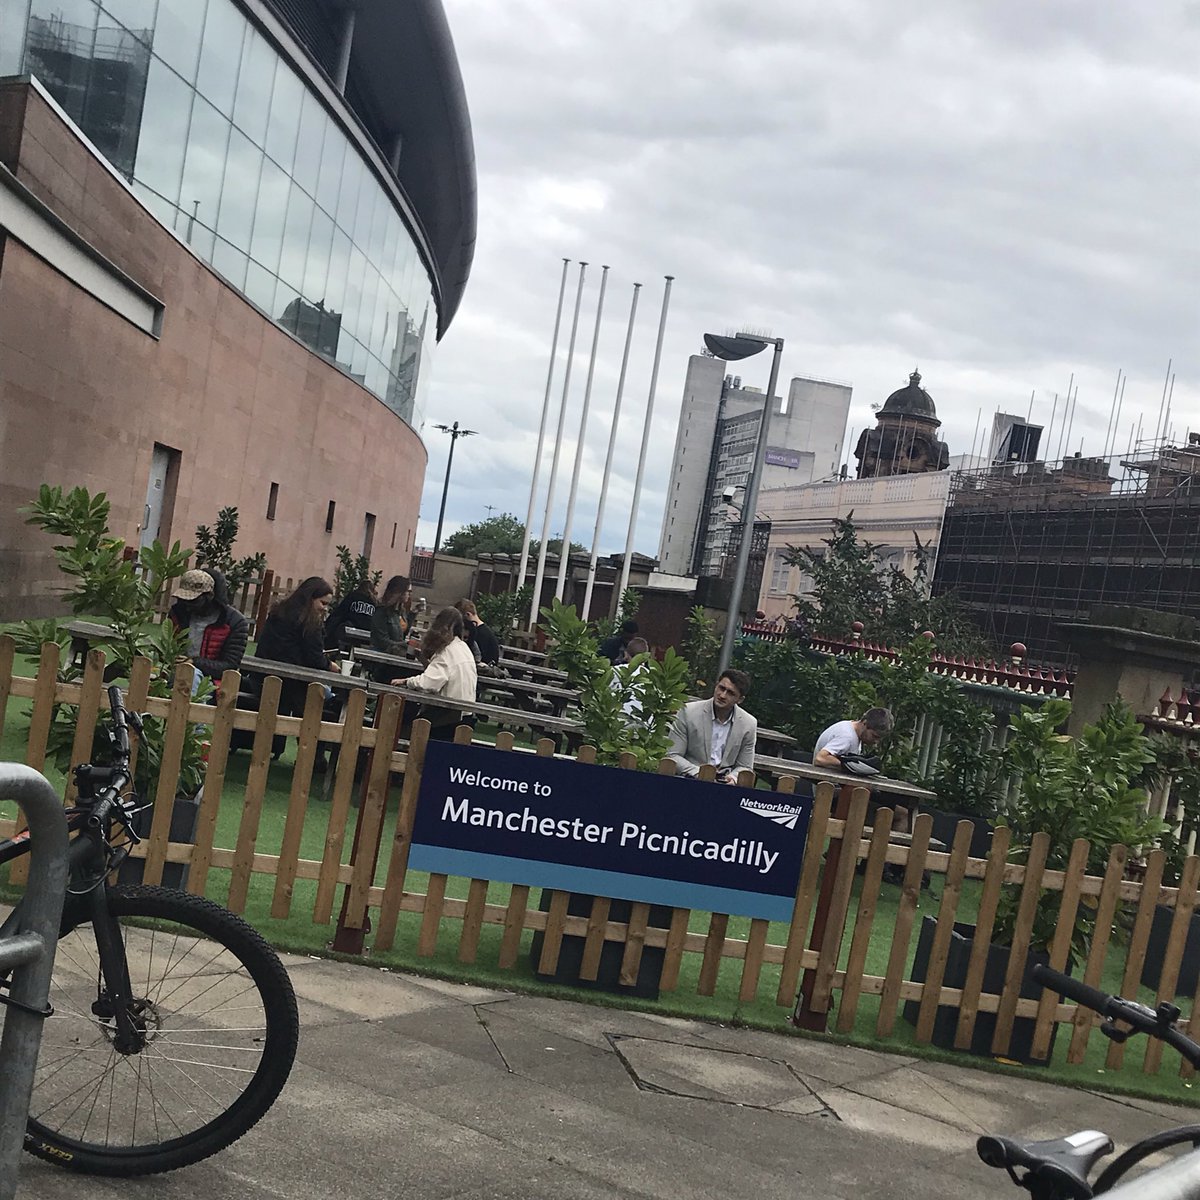 They’ve opened a picnic area at Manchester Piccadilly and naturally they’ve called it...